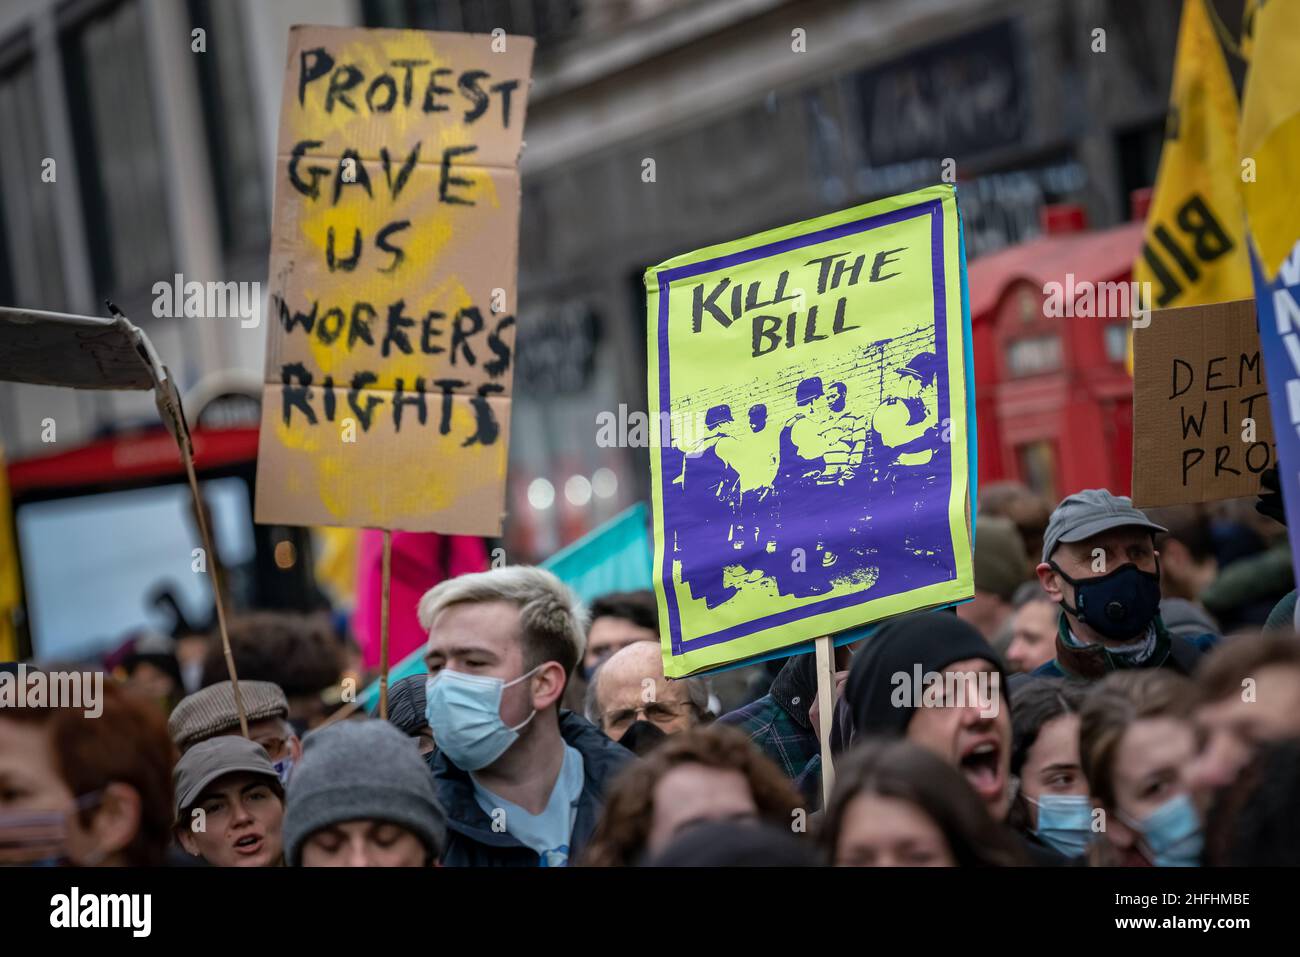 'Kill The Bill' protesters rally against the Police, Crime, Sentencing and Courts Bill (PCSC), which is reaching its final stages in parliament. UK. Stock Photo